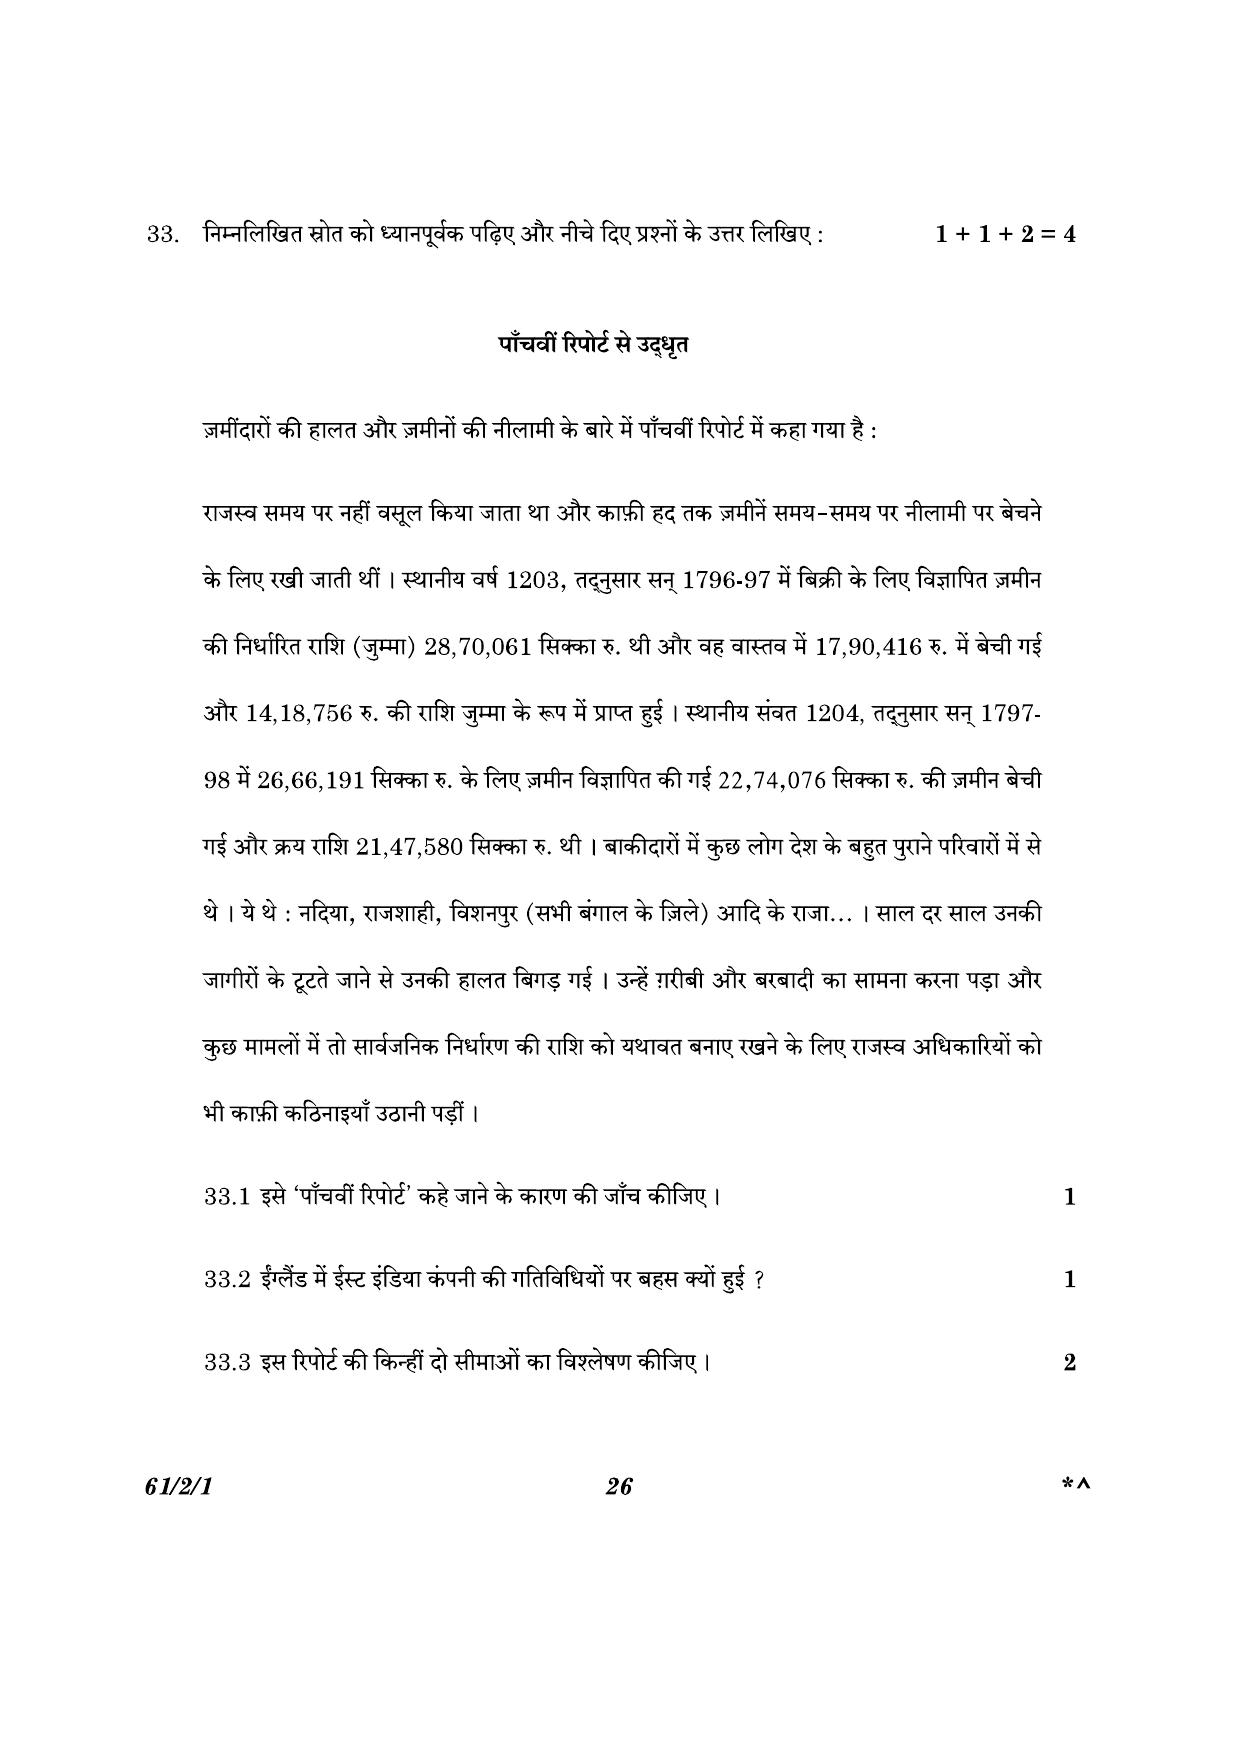 CBSE Class 12 61-2-1 History 2023 Question Paper - Page 26